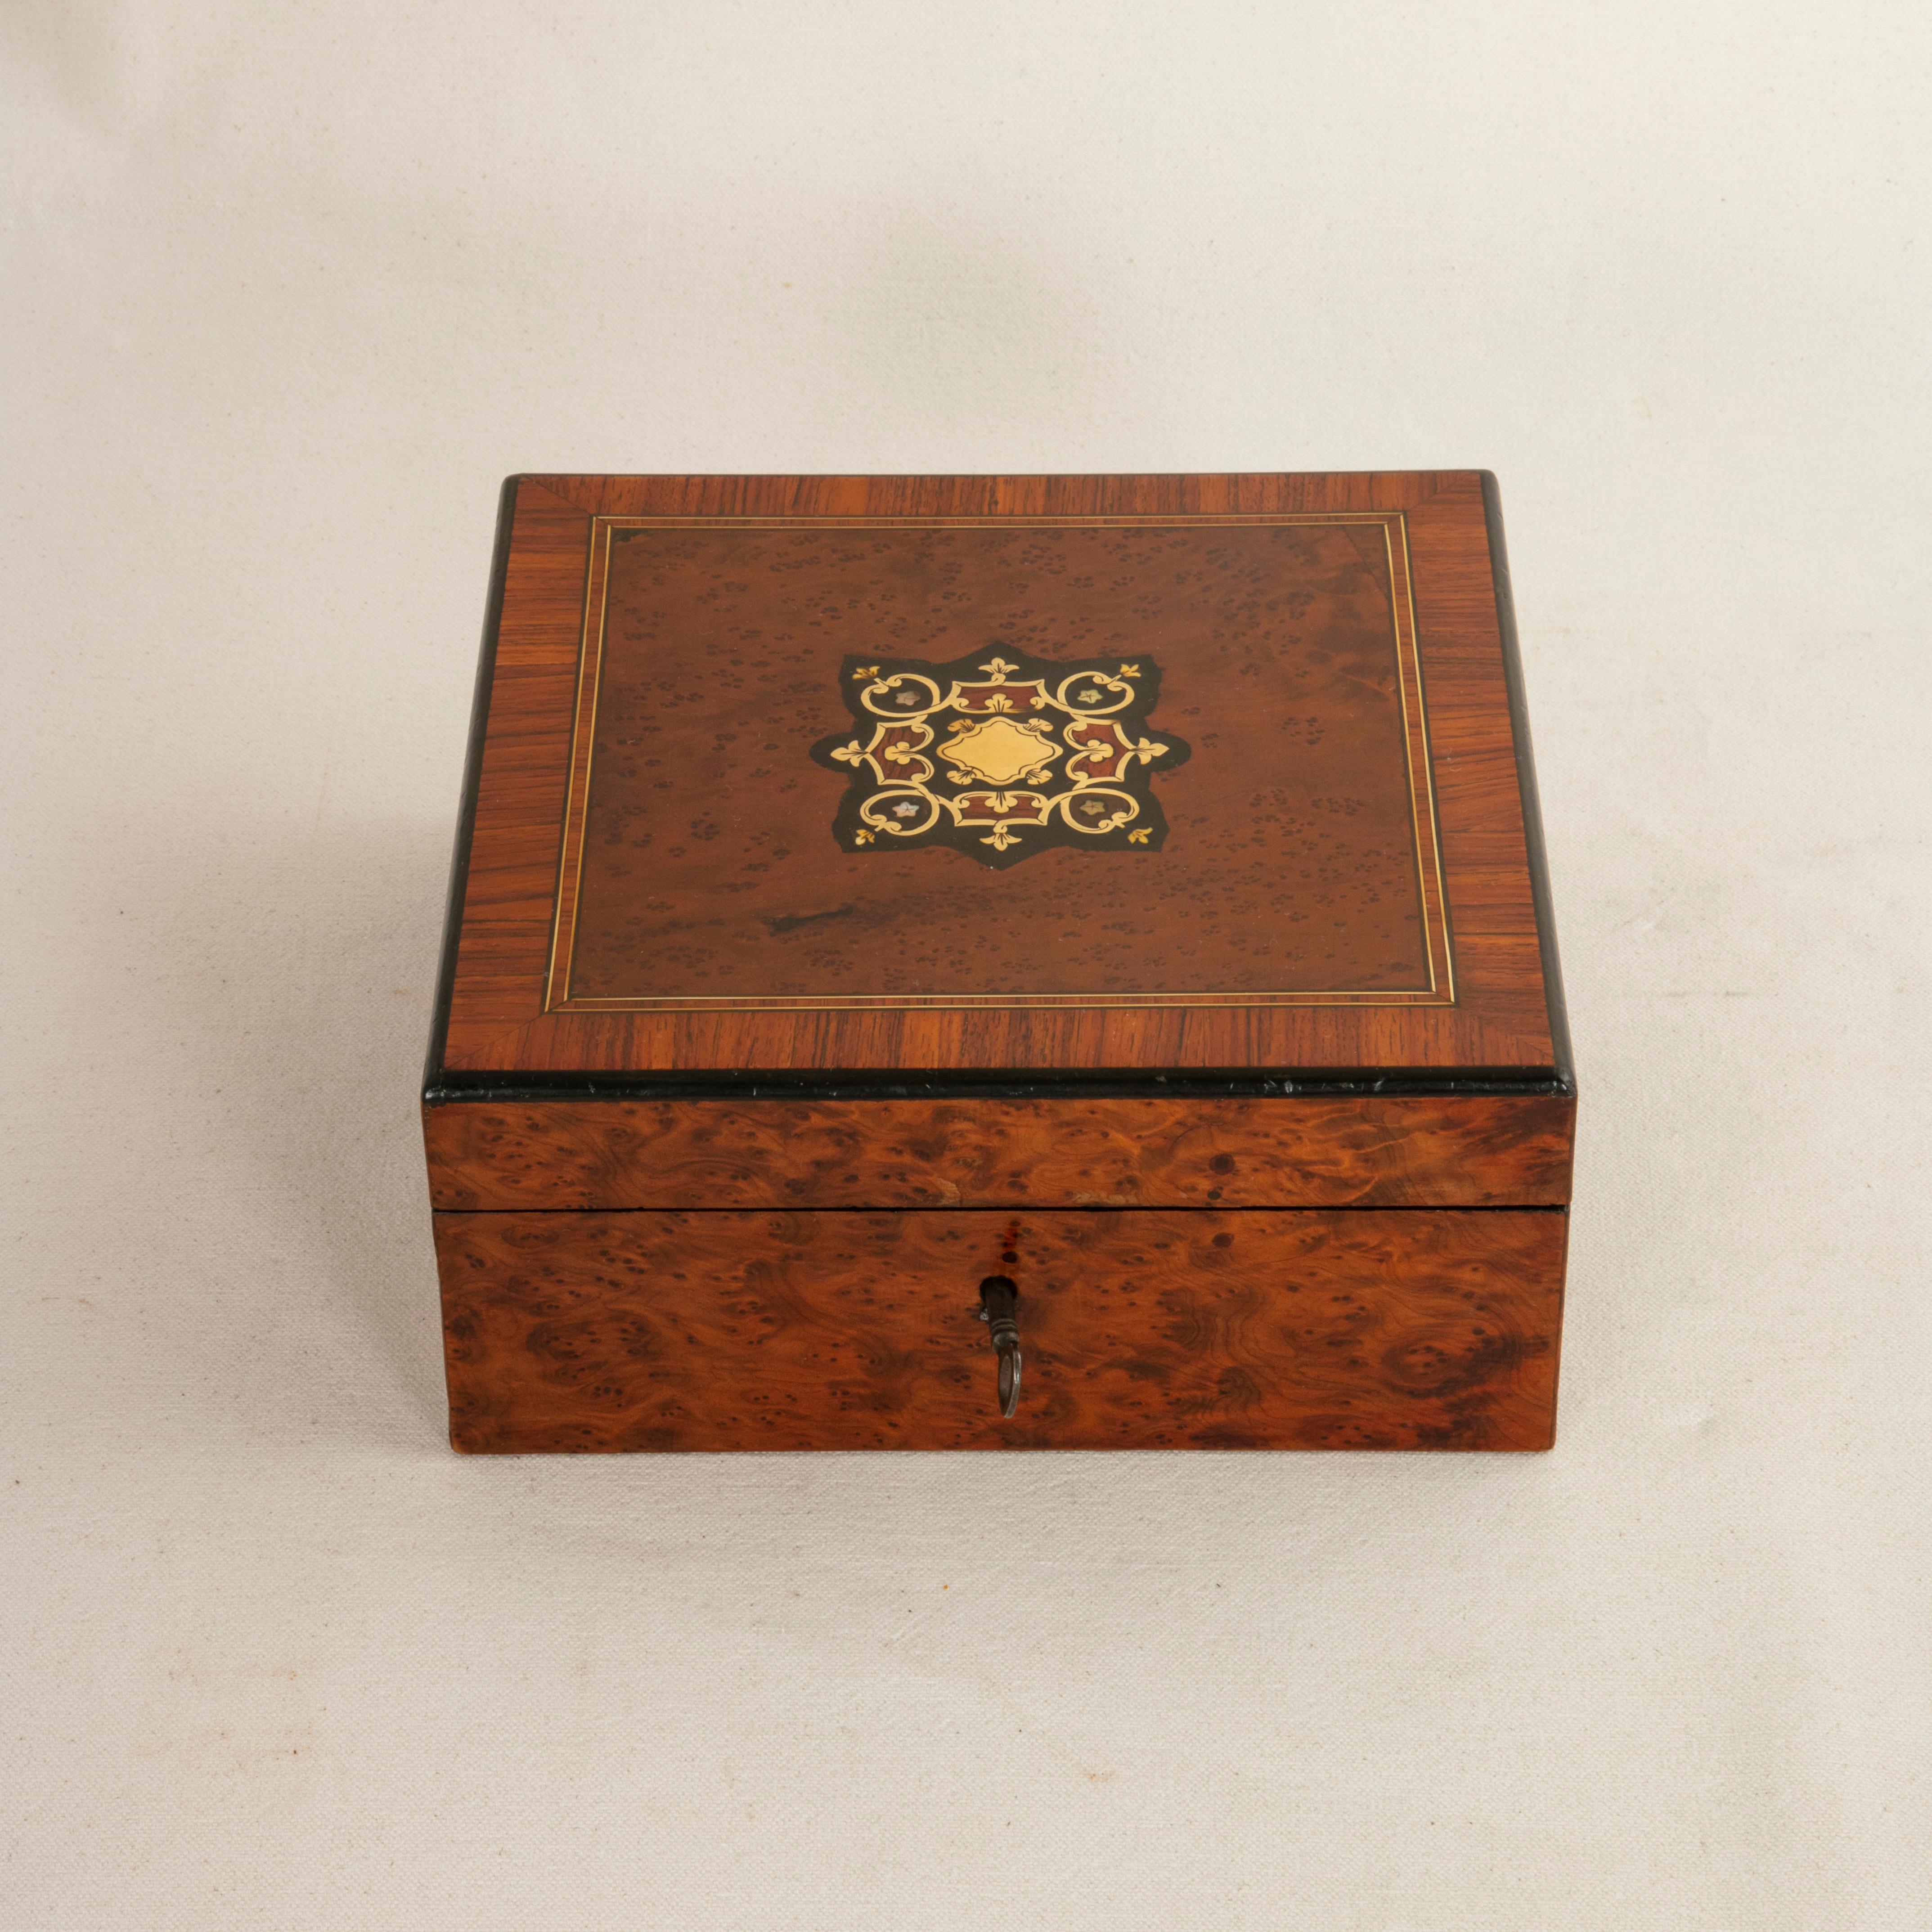 This mid-19th century French Napoleon III period marquetry box features a central field of ebonized pear wood with a bronze cartouche and scrolling bronze inlay. Mother of pearl flowers also detail the central design. The top is additionally